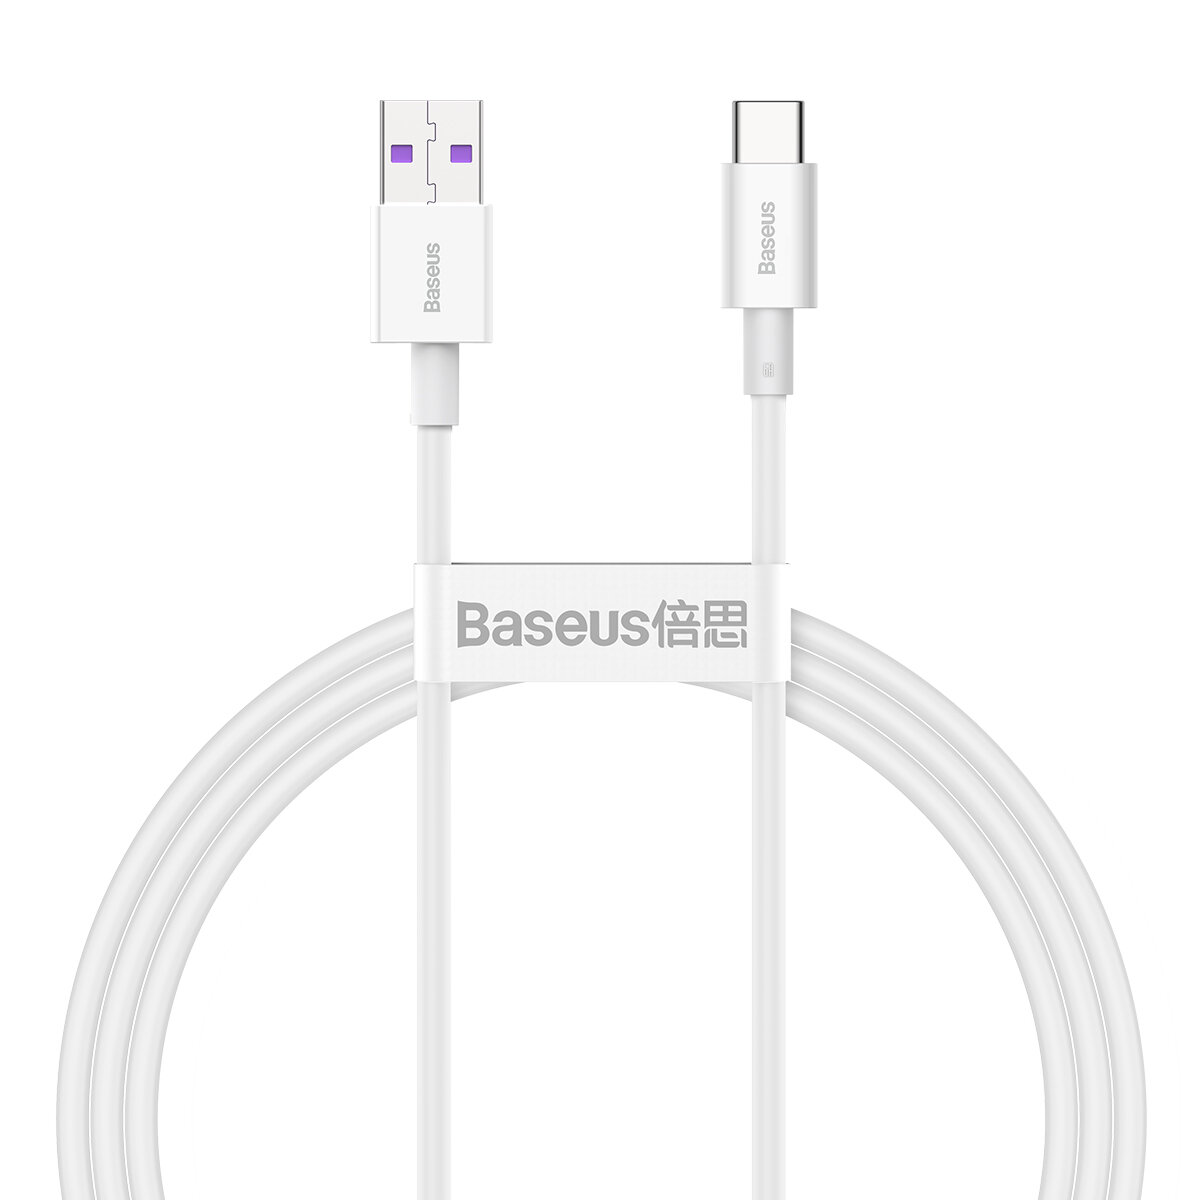 

Baseus A 66W 6A Flash Charging USB to Type-C Cable for Samsung Galaxy S21 Note S20 ultra Huawei Mate40 OnePlus 8 Pro